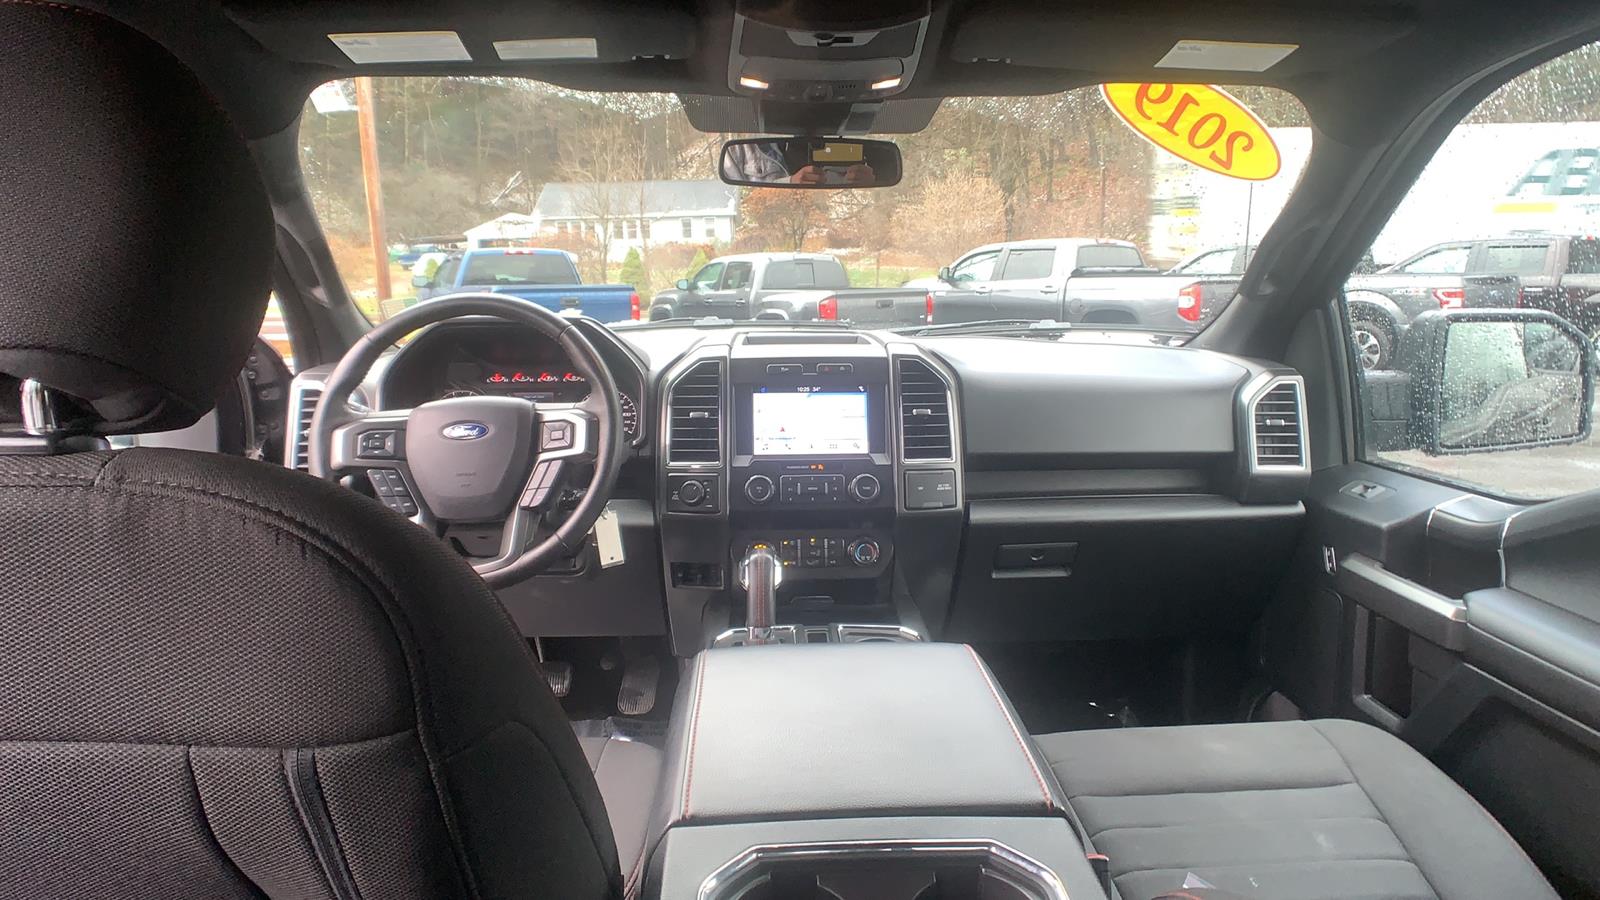 2019 Ford F-150 Short Bed